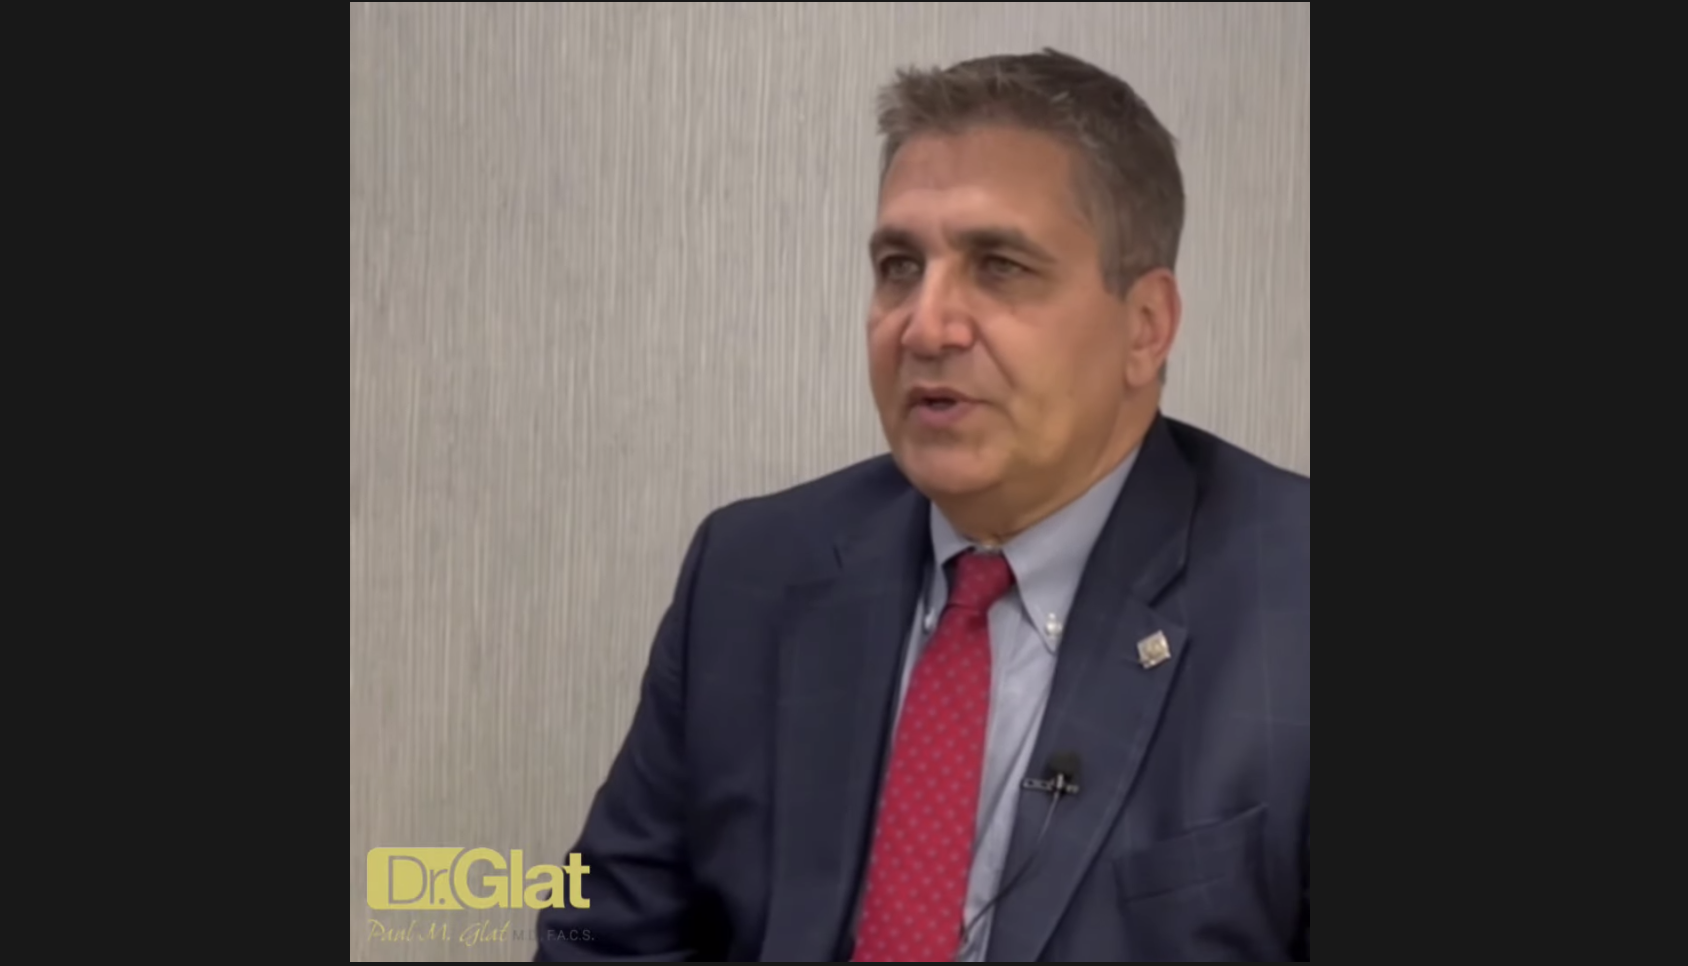 Dr. Glat in an Interview